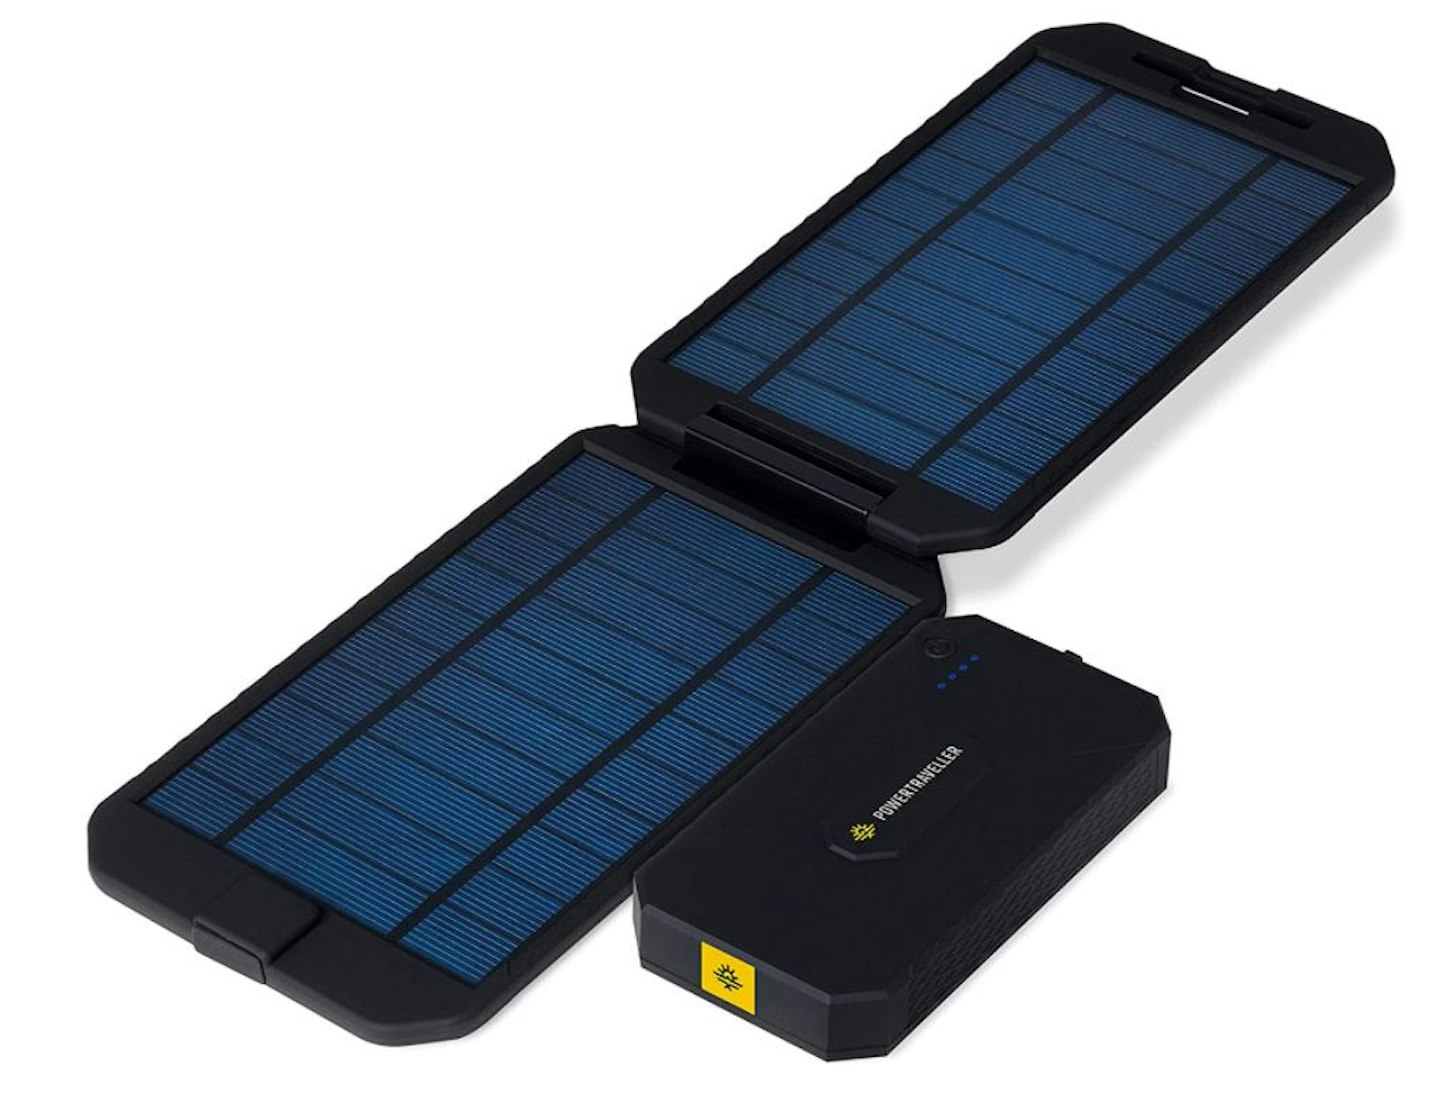 Powertraveller Extreme Solar Charger & Power Bank